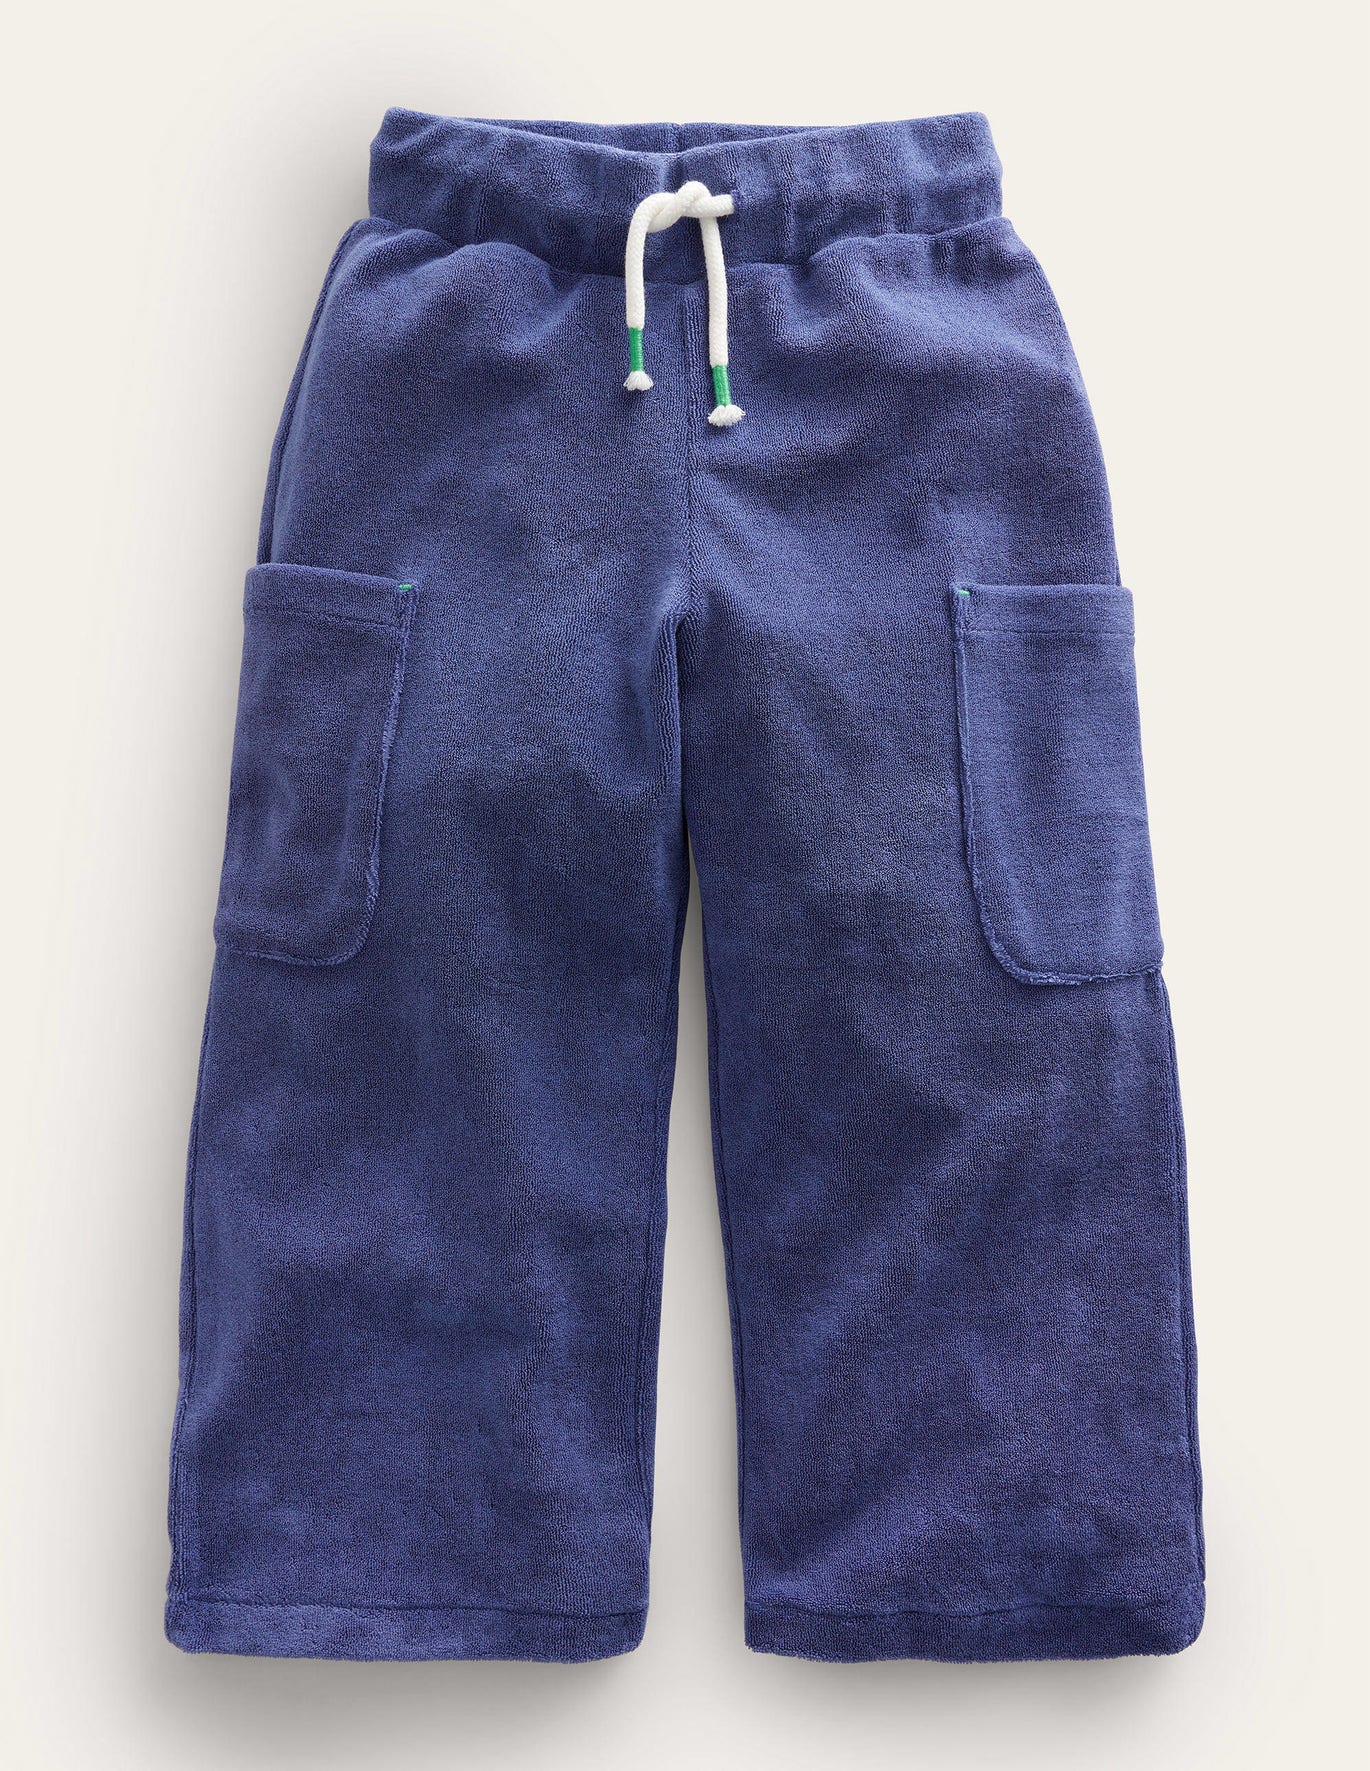 Boden Towelling Cargo Pants - Starboard Blue